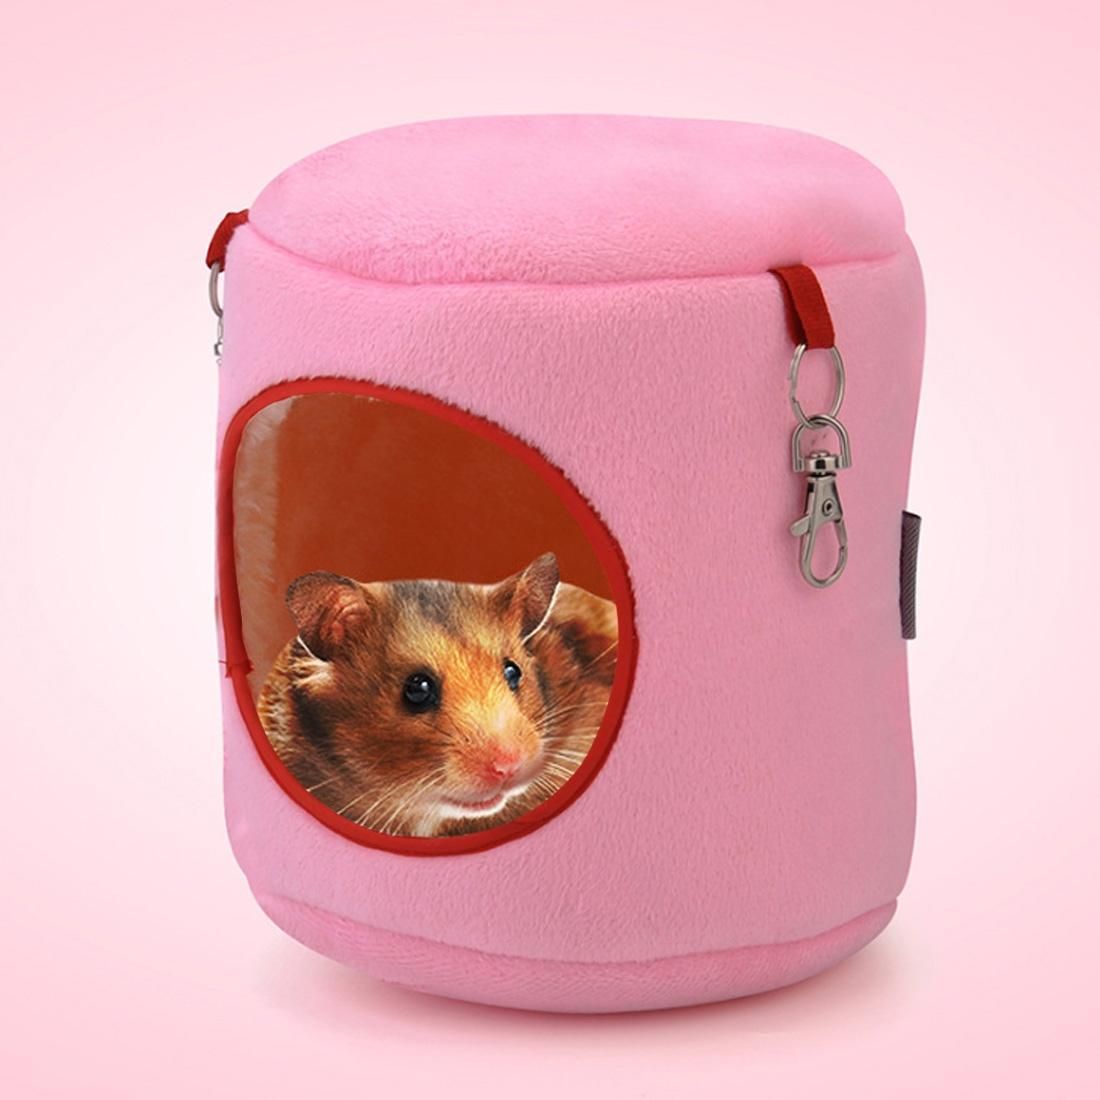 Flannel Cylinder Pet House Warm Hamster Hammock Hanging Bed Small Pets Nest, L, Size:16*16*16cm (Pink)